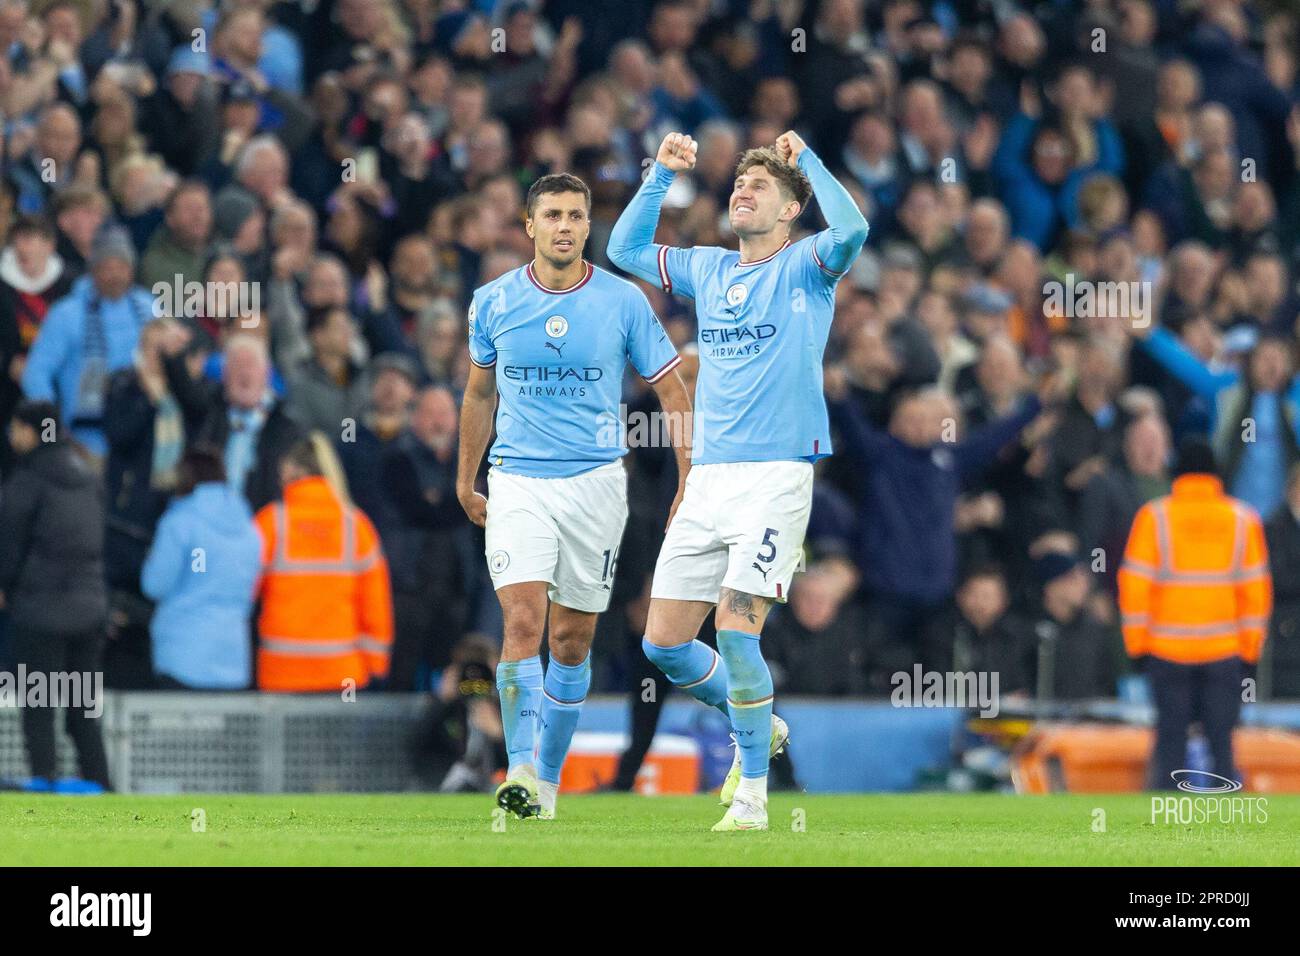 Manchester, England - 26 April 2023, Manchester City defender John Stones (5) scores and celebrates after a VAR check 2-0 during the English championship Premier League football match between Manchester City and Arsenal on 26 April 2023 at the Etihad Stadium in Manchester, England - Photo: Ian Stephen/DPPI/LiveMedia Stock Photo